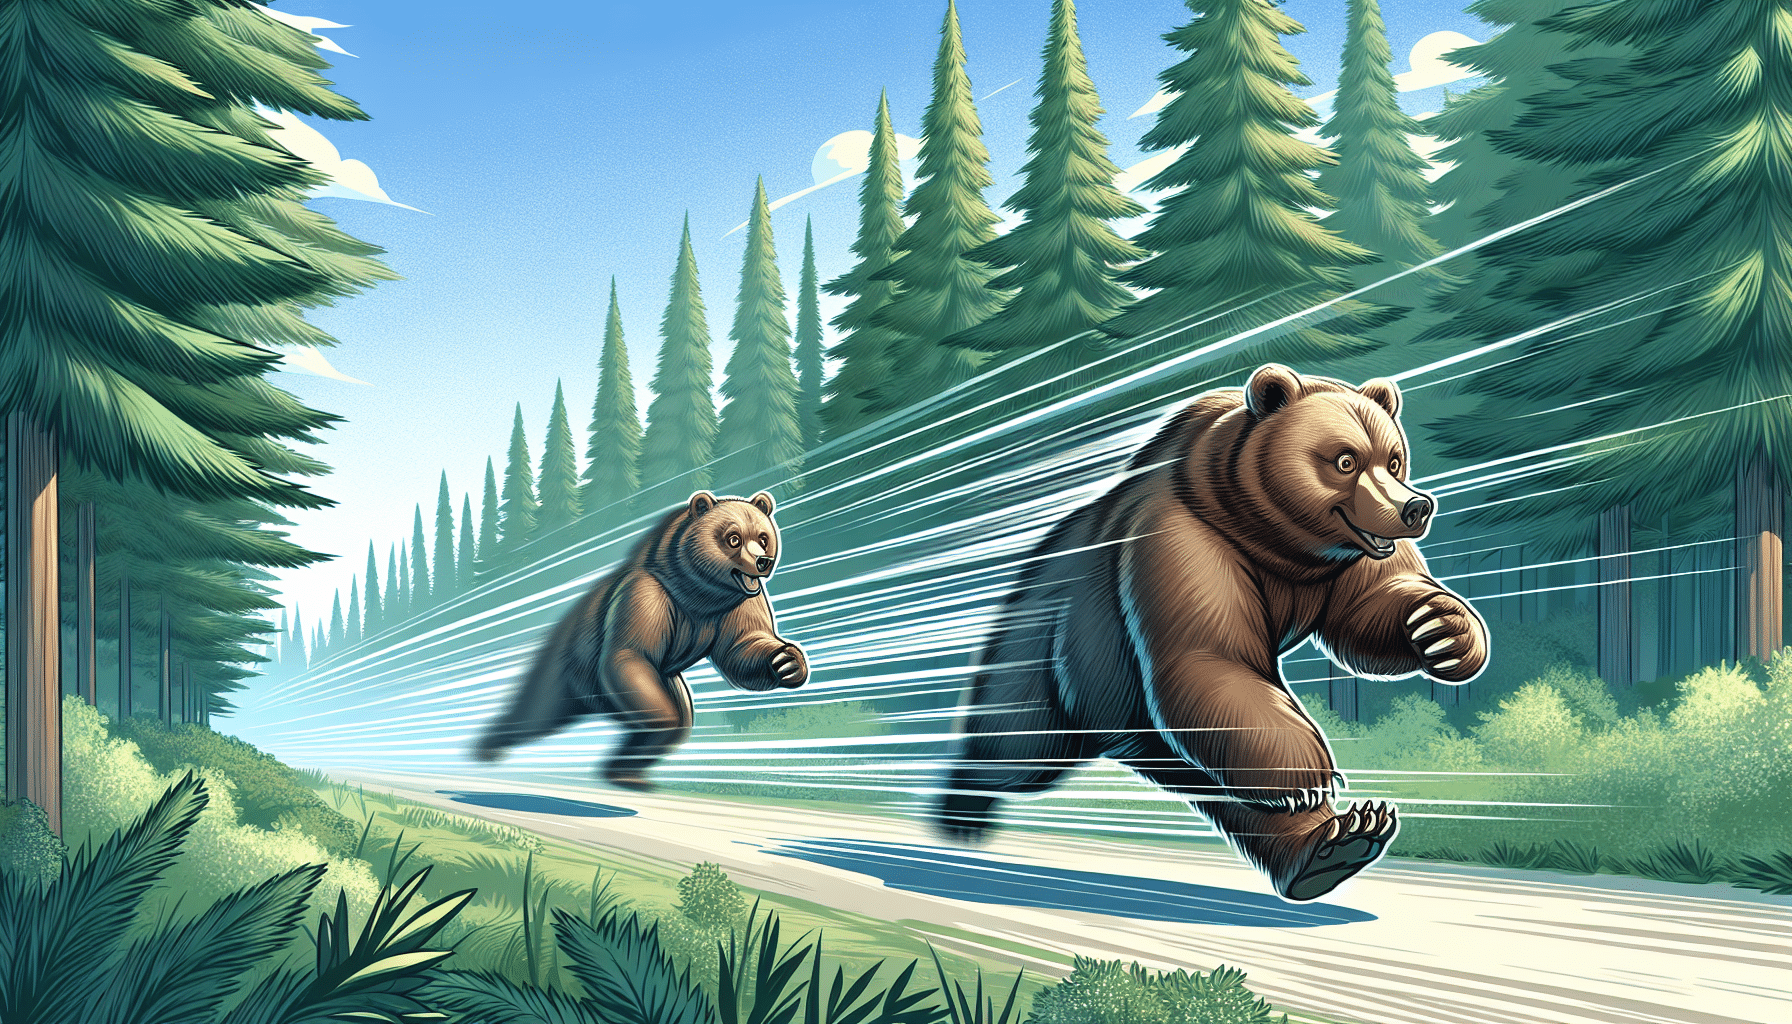 Illustrate a forest scene with two adult brown bears demonstrating their speed. One bear is bounding energetically towards the viewer, displaying its agility on a semi-clear pathway. The other bear is farther in the distance, a blurred figure symbolizing its rapid motion. Surround the bears with a lush green environment, tall pine trees and foliage, a clear blue sky. Exclude any text or human figures, brands, logos, from this image.